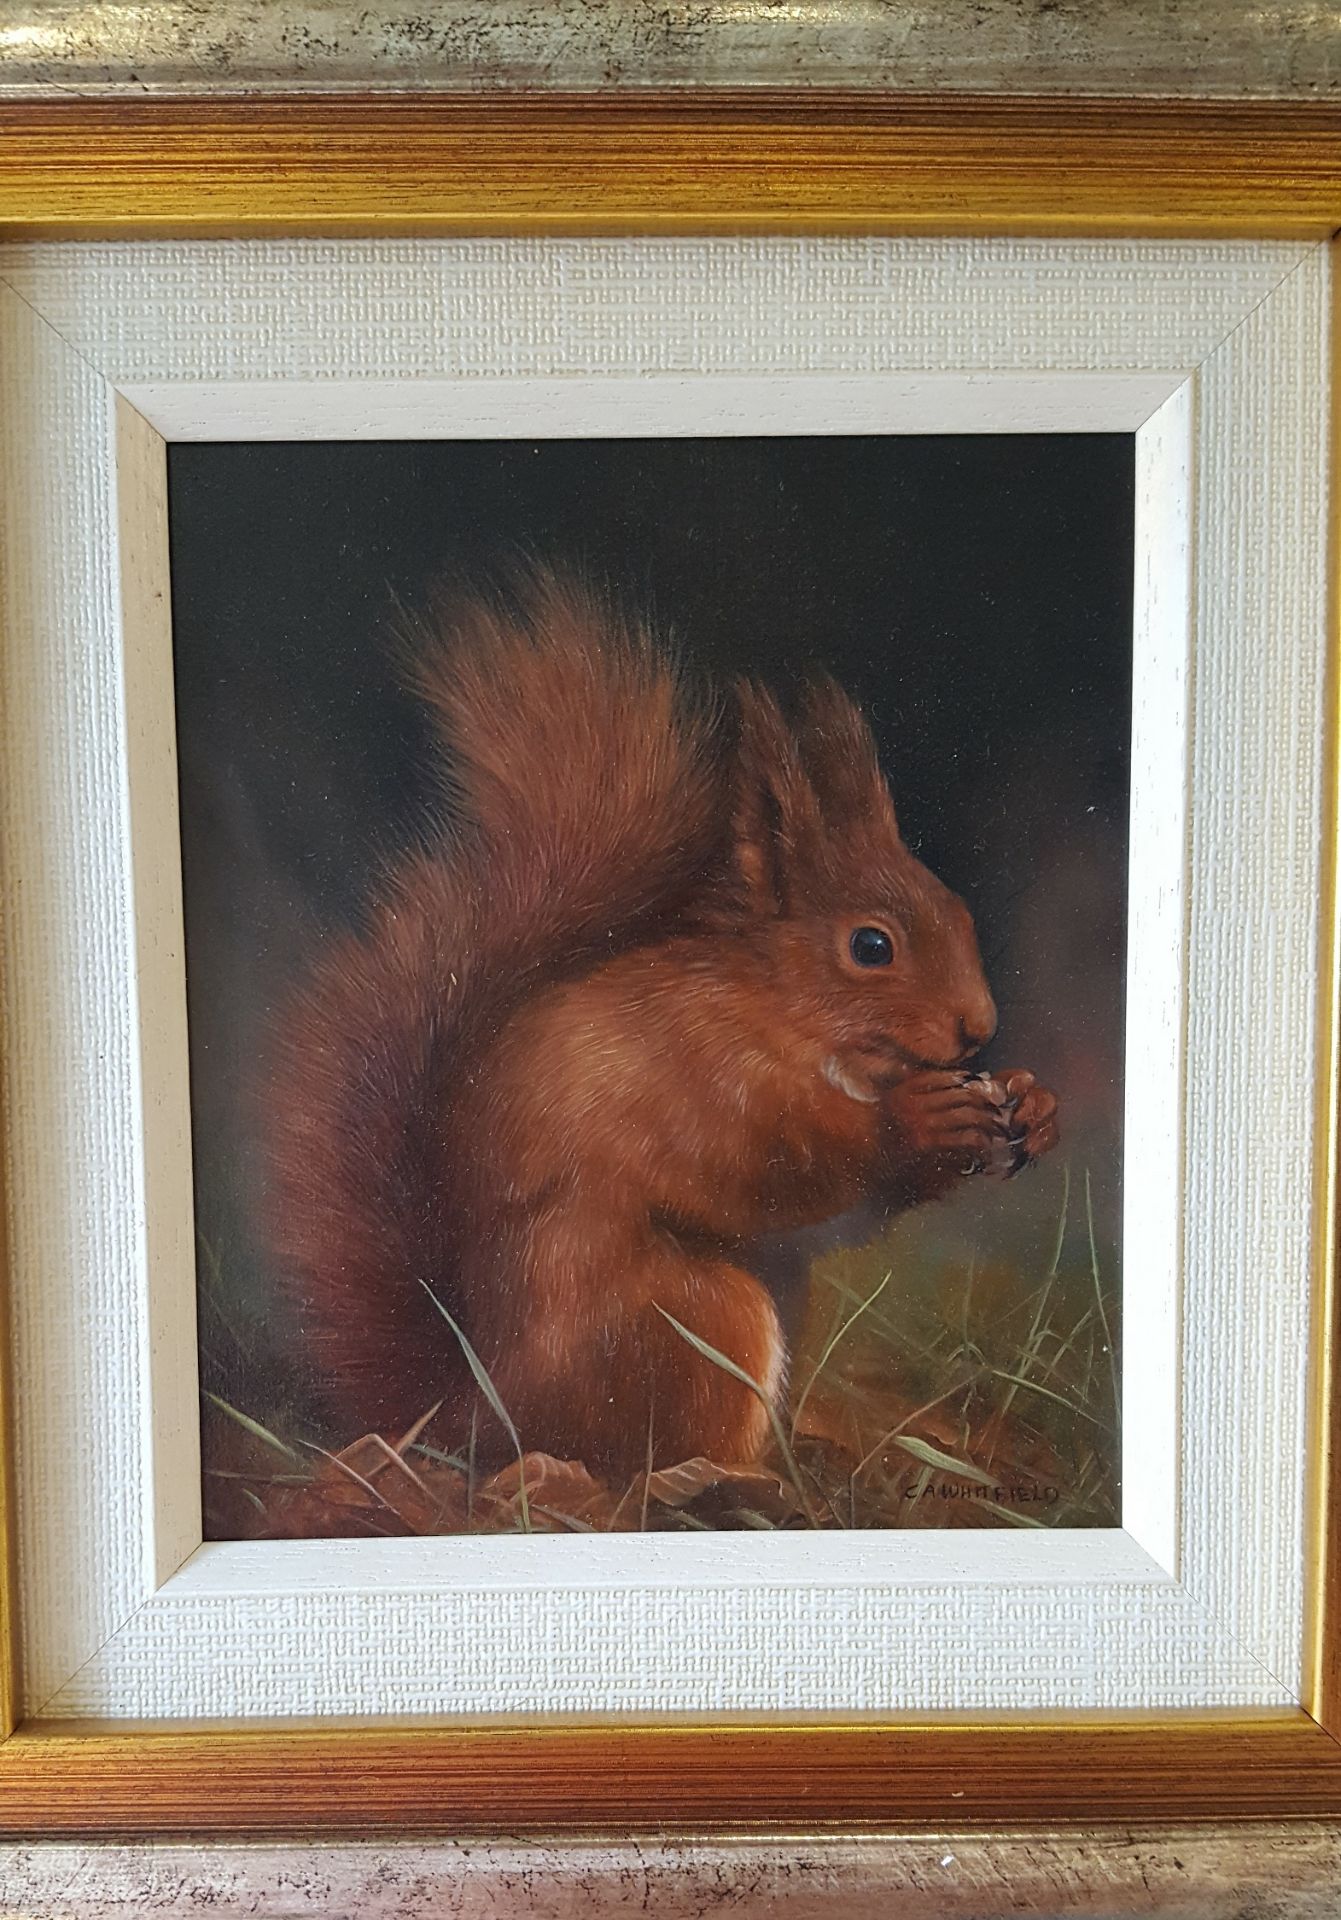 Fine Art Framed Oil Painting on Board Red Squirrel signed lower right C A Whitfield - Image 3 of 3